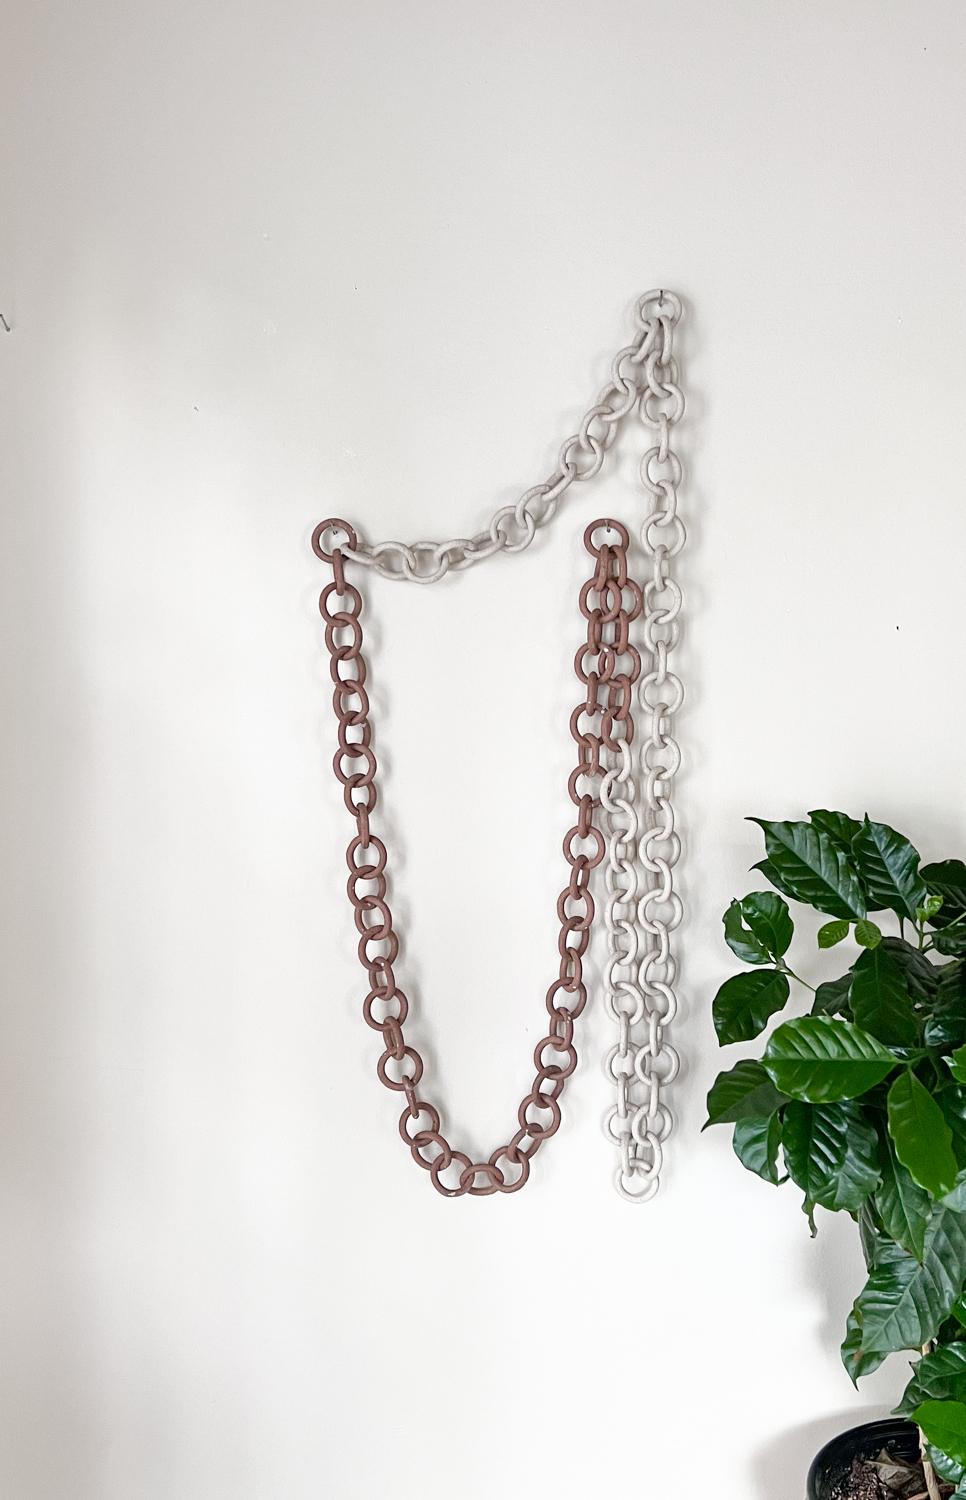 Organic Modern Ceramic Link Chain Sculpture and Wall Hanging